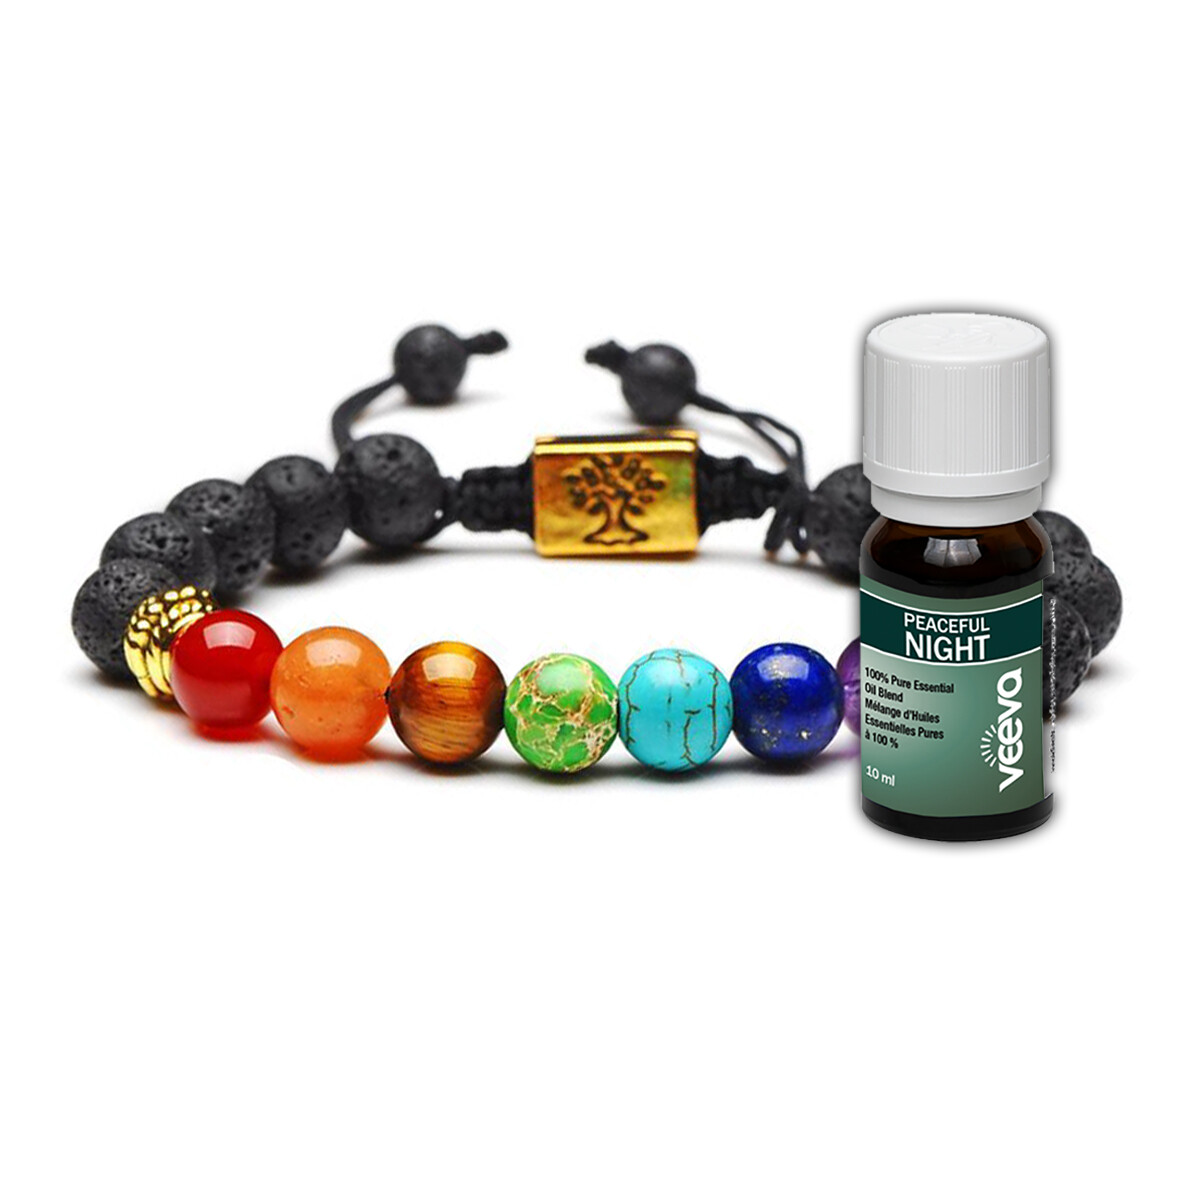 7 Chakra & Lava Stones Personal Aromatherapy Bracelet with Peaceful NIGHT Essential Oil Blend (2 models)